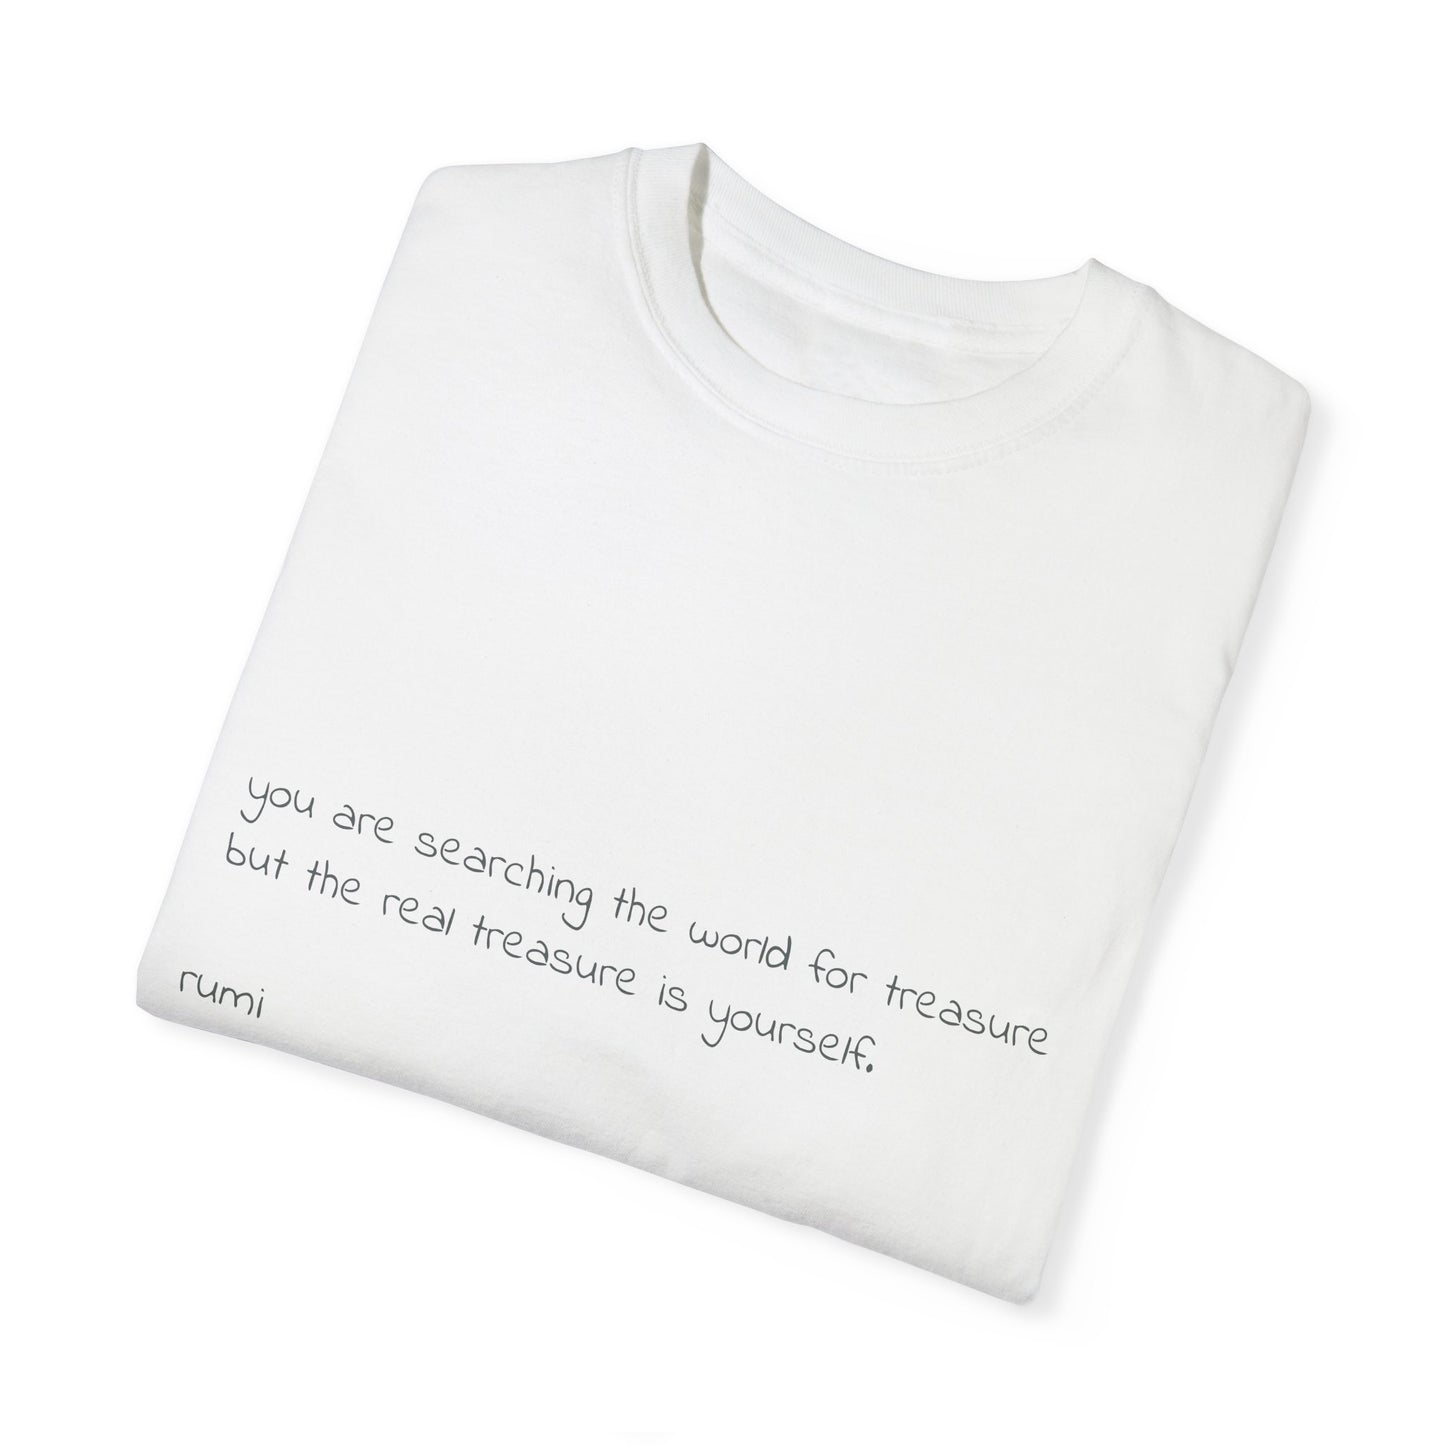 Rumi quote Garment-Dyed T-shirt